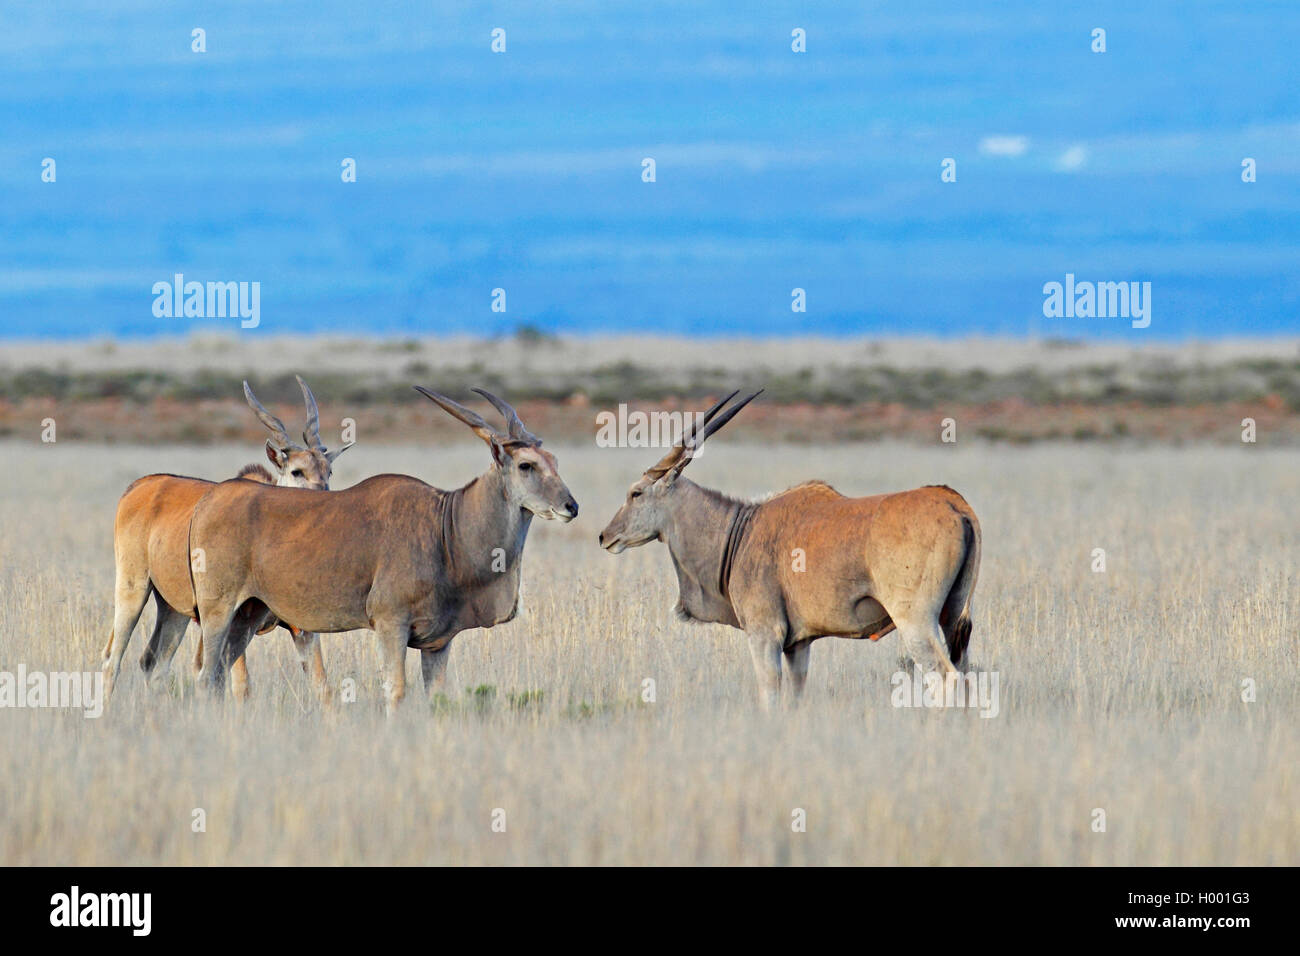 Common eland, Southern Eland (Taurotragus oryx, Tragelaphus oryx), group stands in African Savanna, South Africa, Eastern Cape, Mountain Zebra National Park Stock Photo